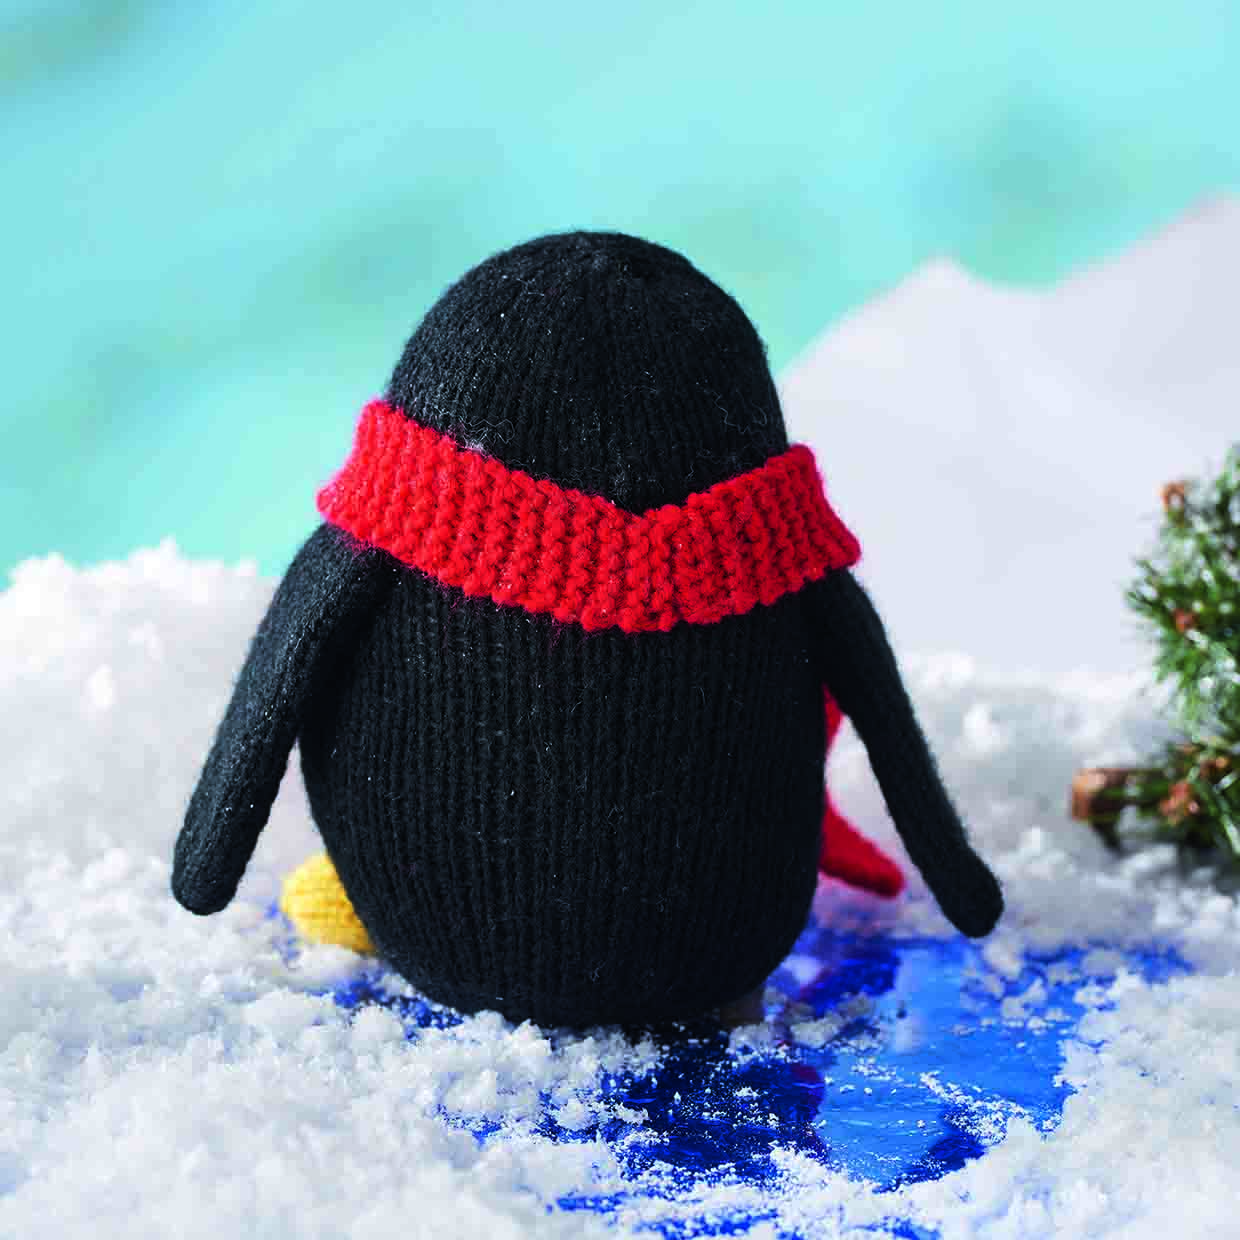 the penguin knitting pattern free is easy to amok up, stuffing and stitching along the penguins back, which is seen in this picture